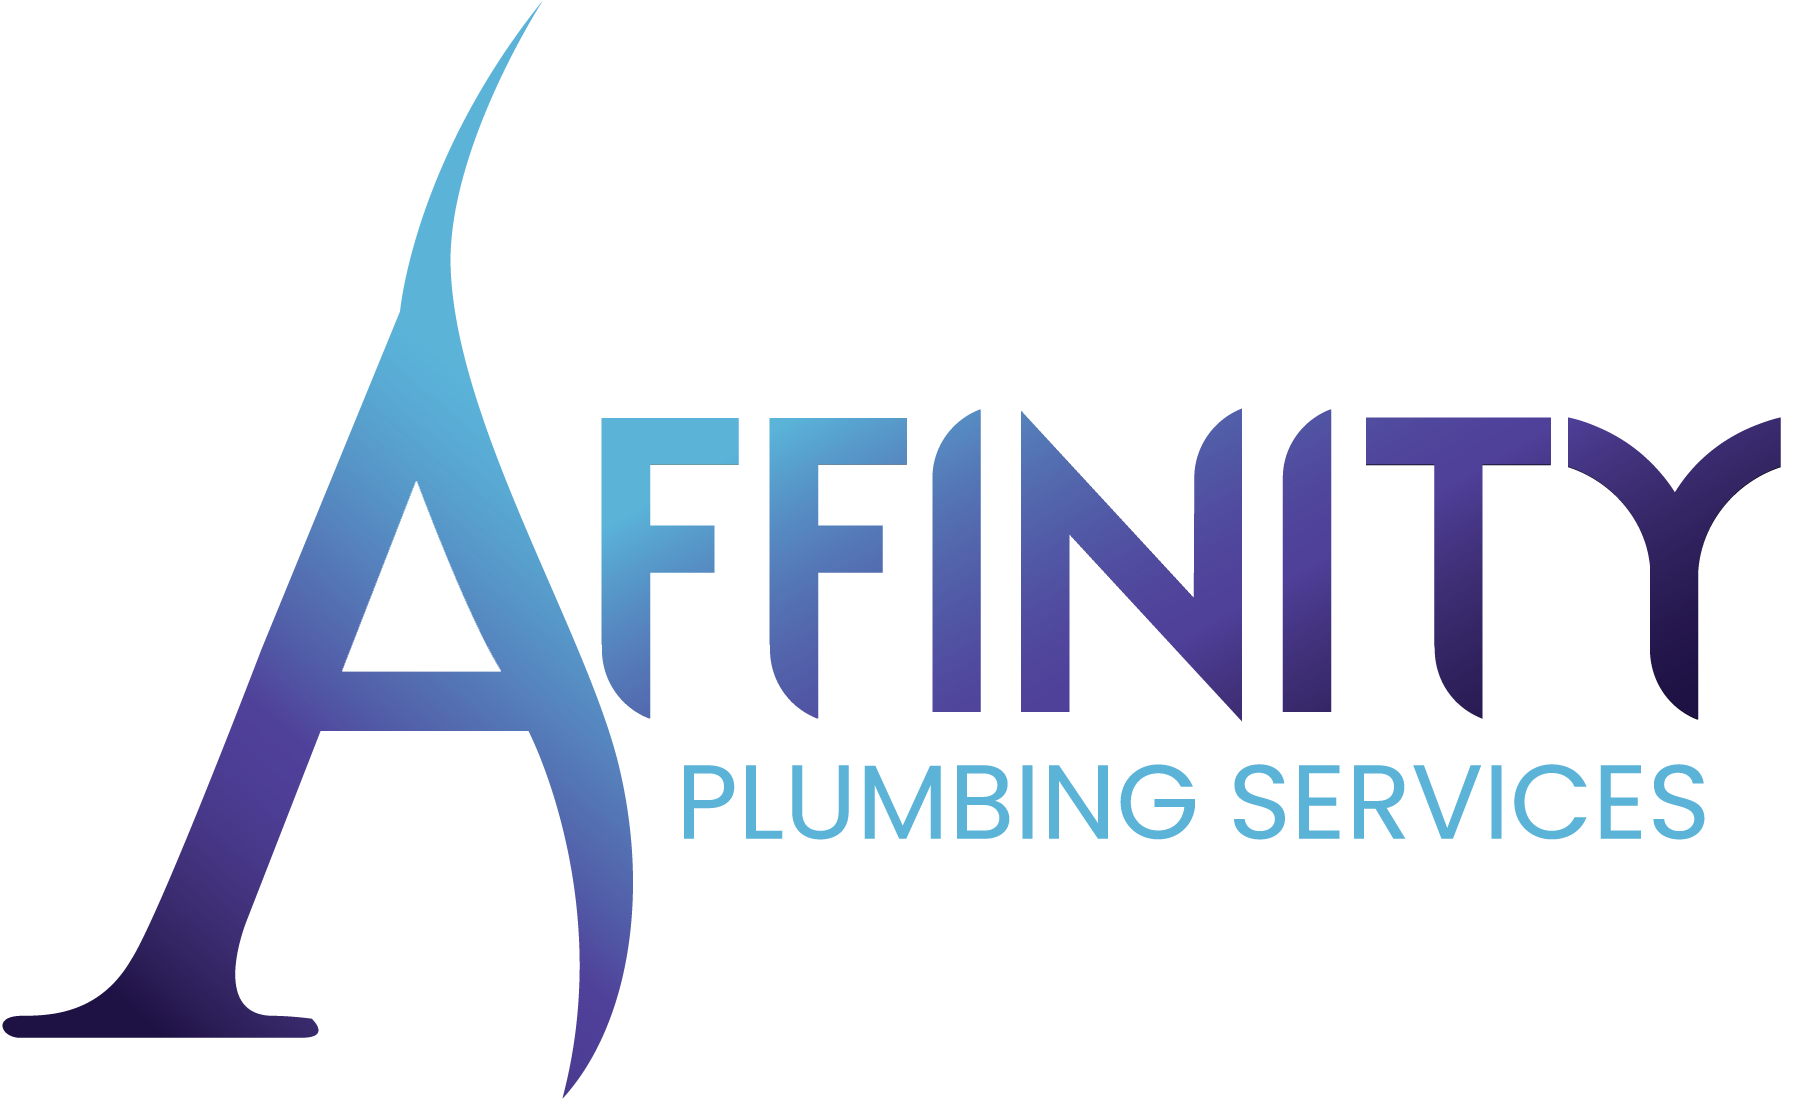 Affinity Plumbing Services